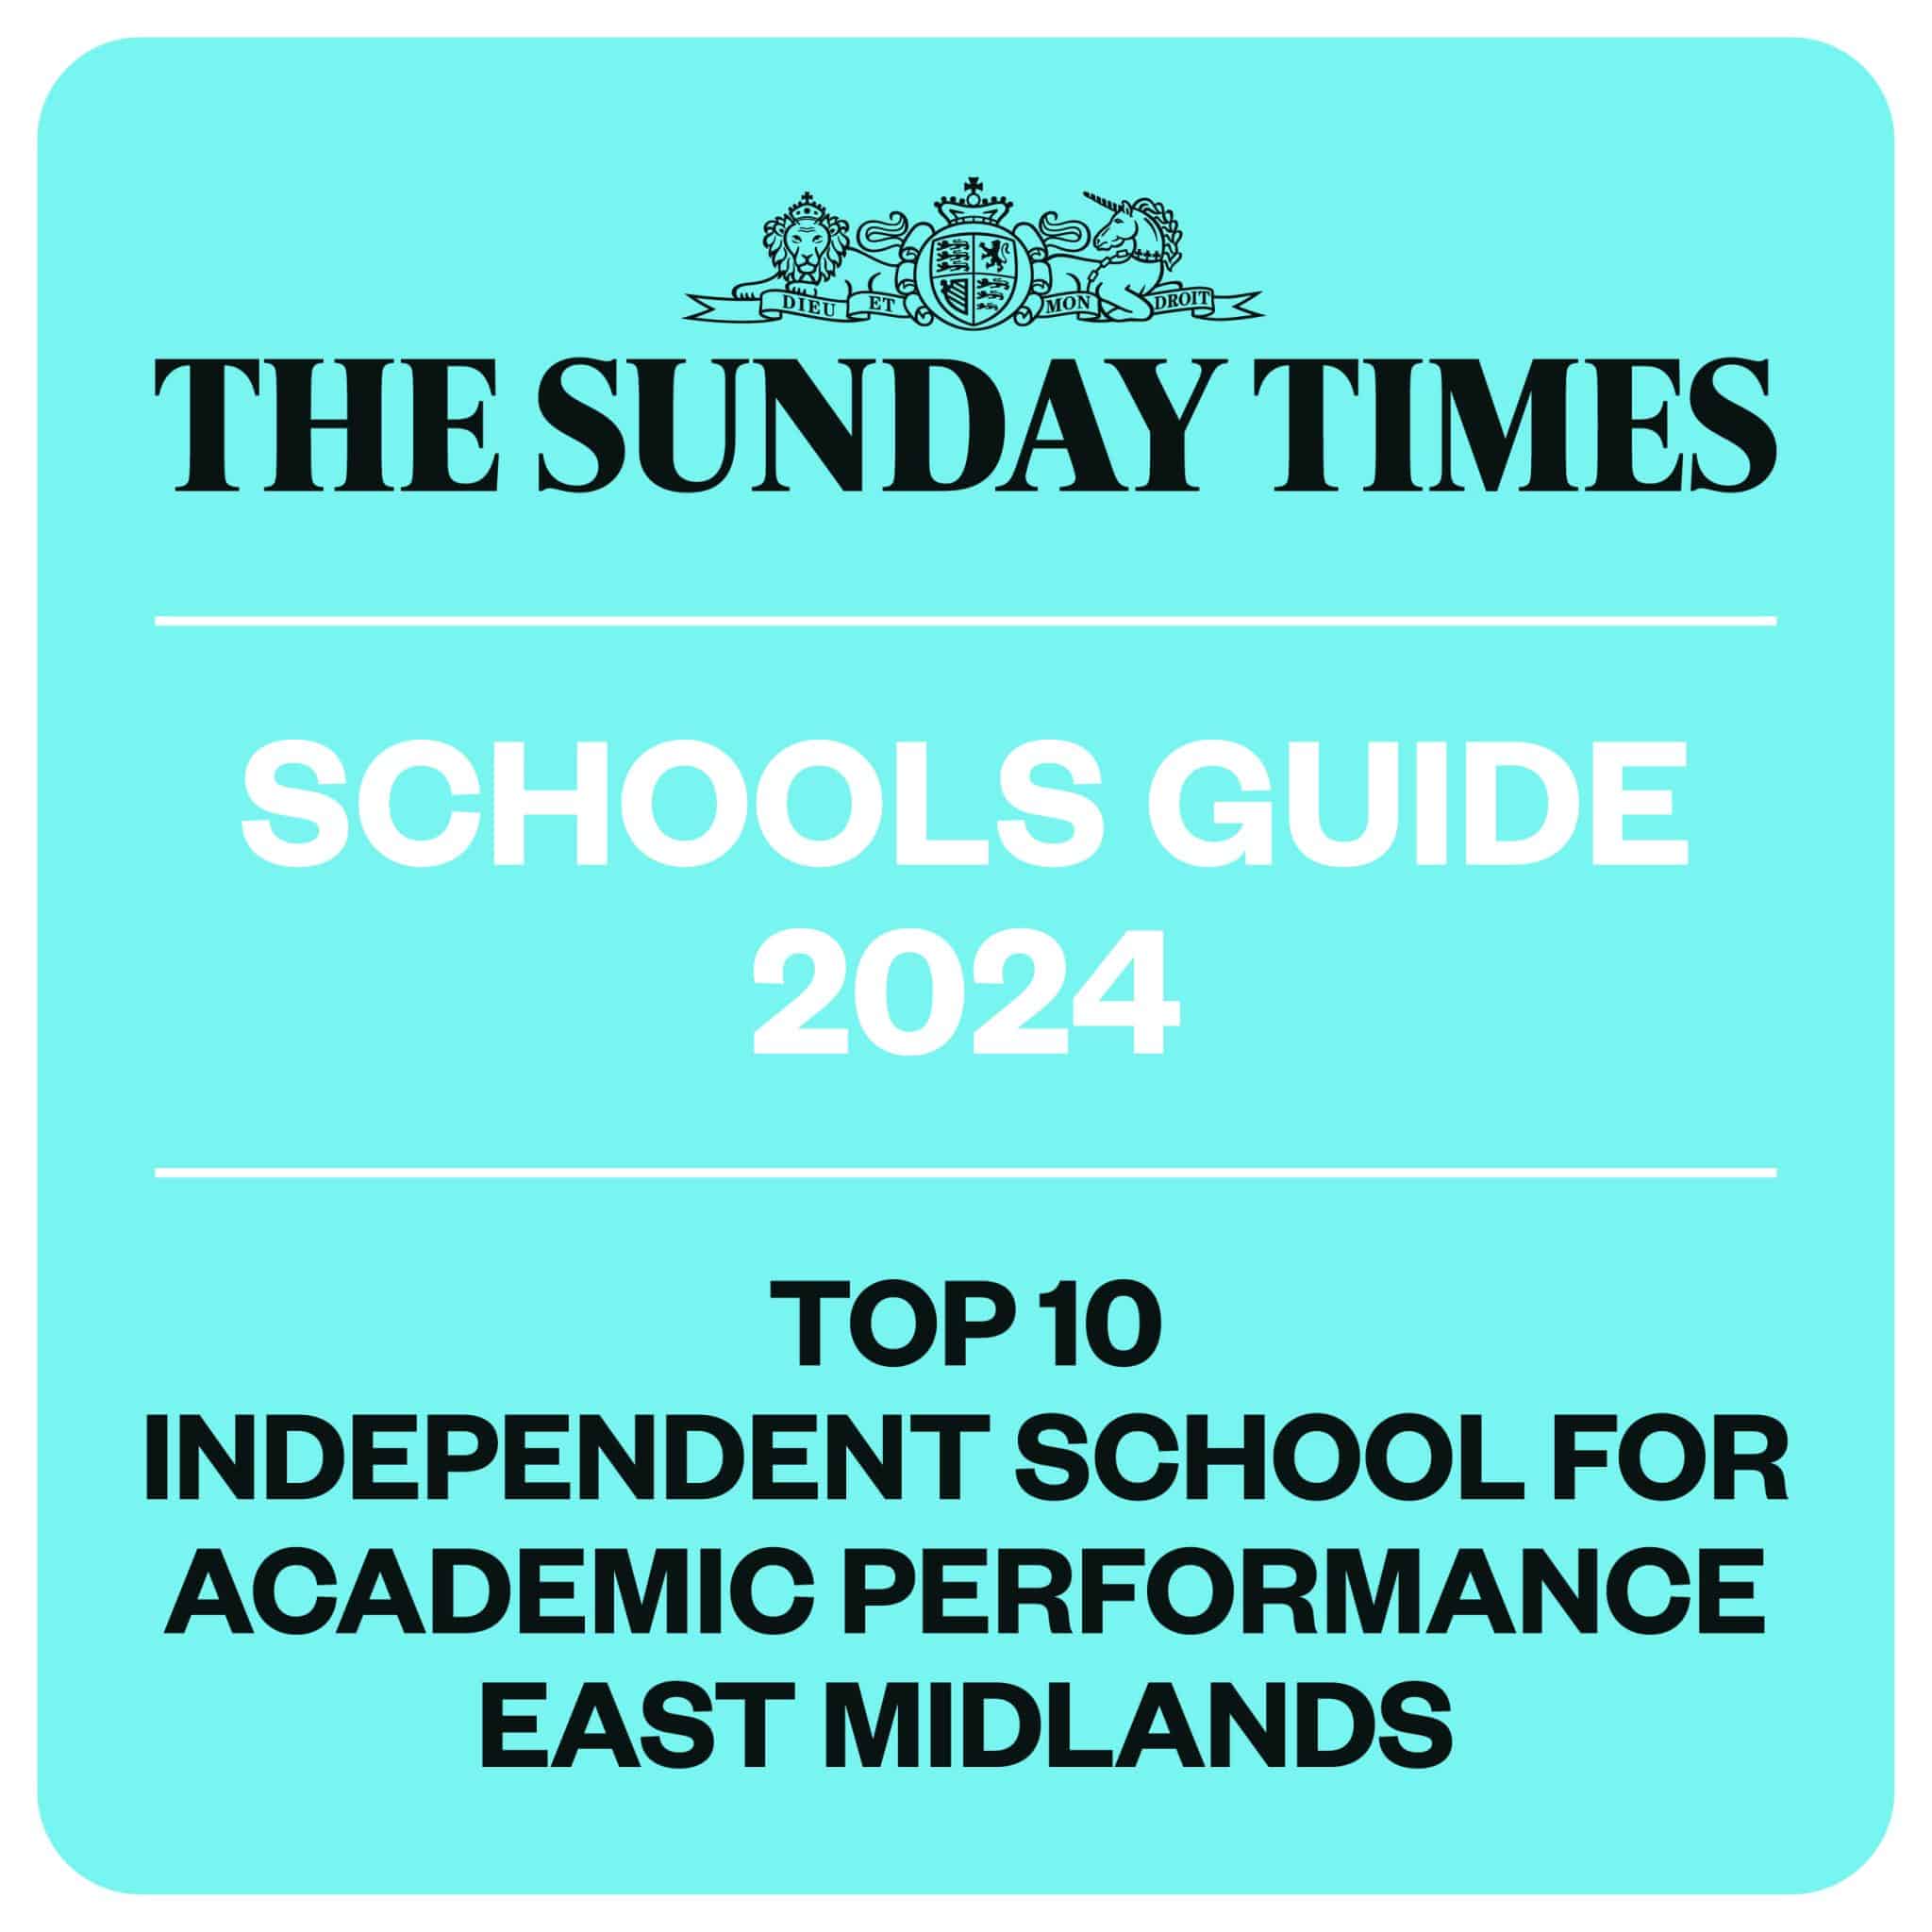 The Sunday Times Schools Guide 2024